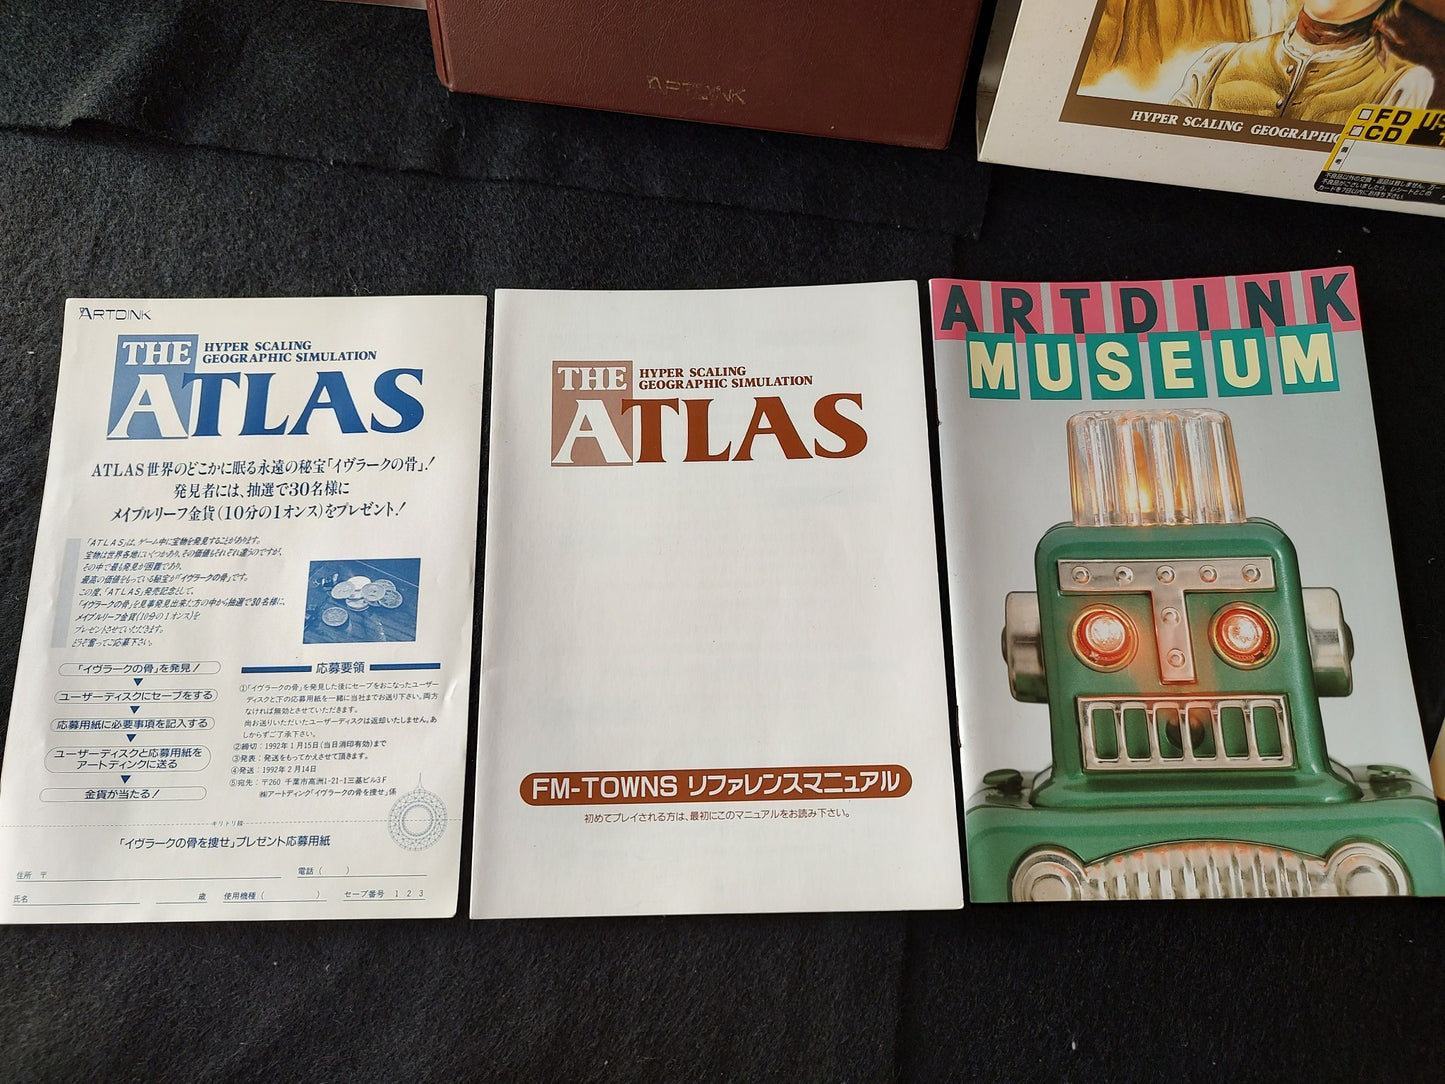 THE ATLAS ARTDINK FM TOWNS Marty Game w/Manual, Box set, Working-f1022-